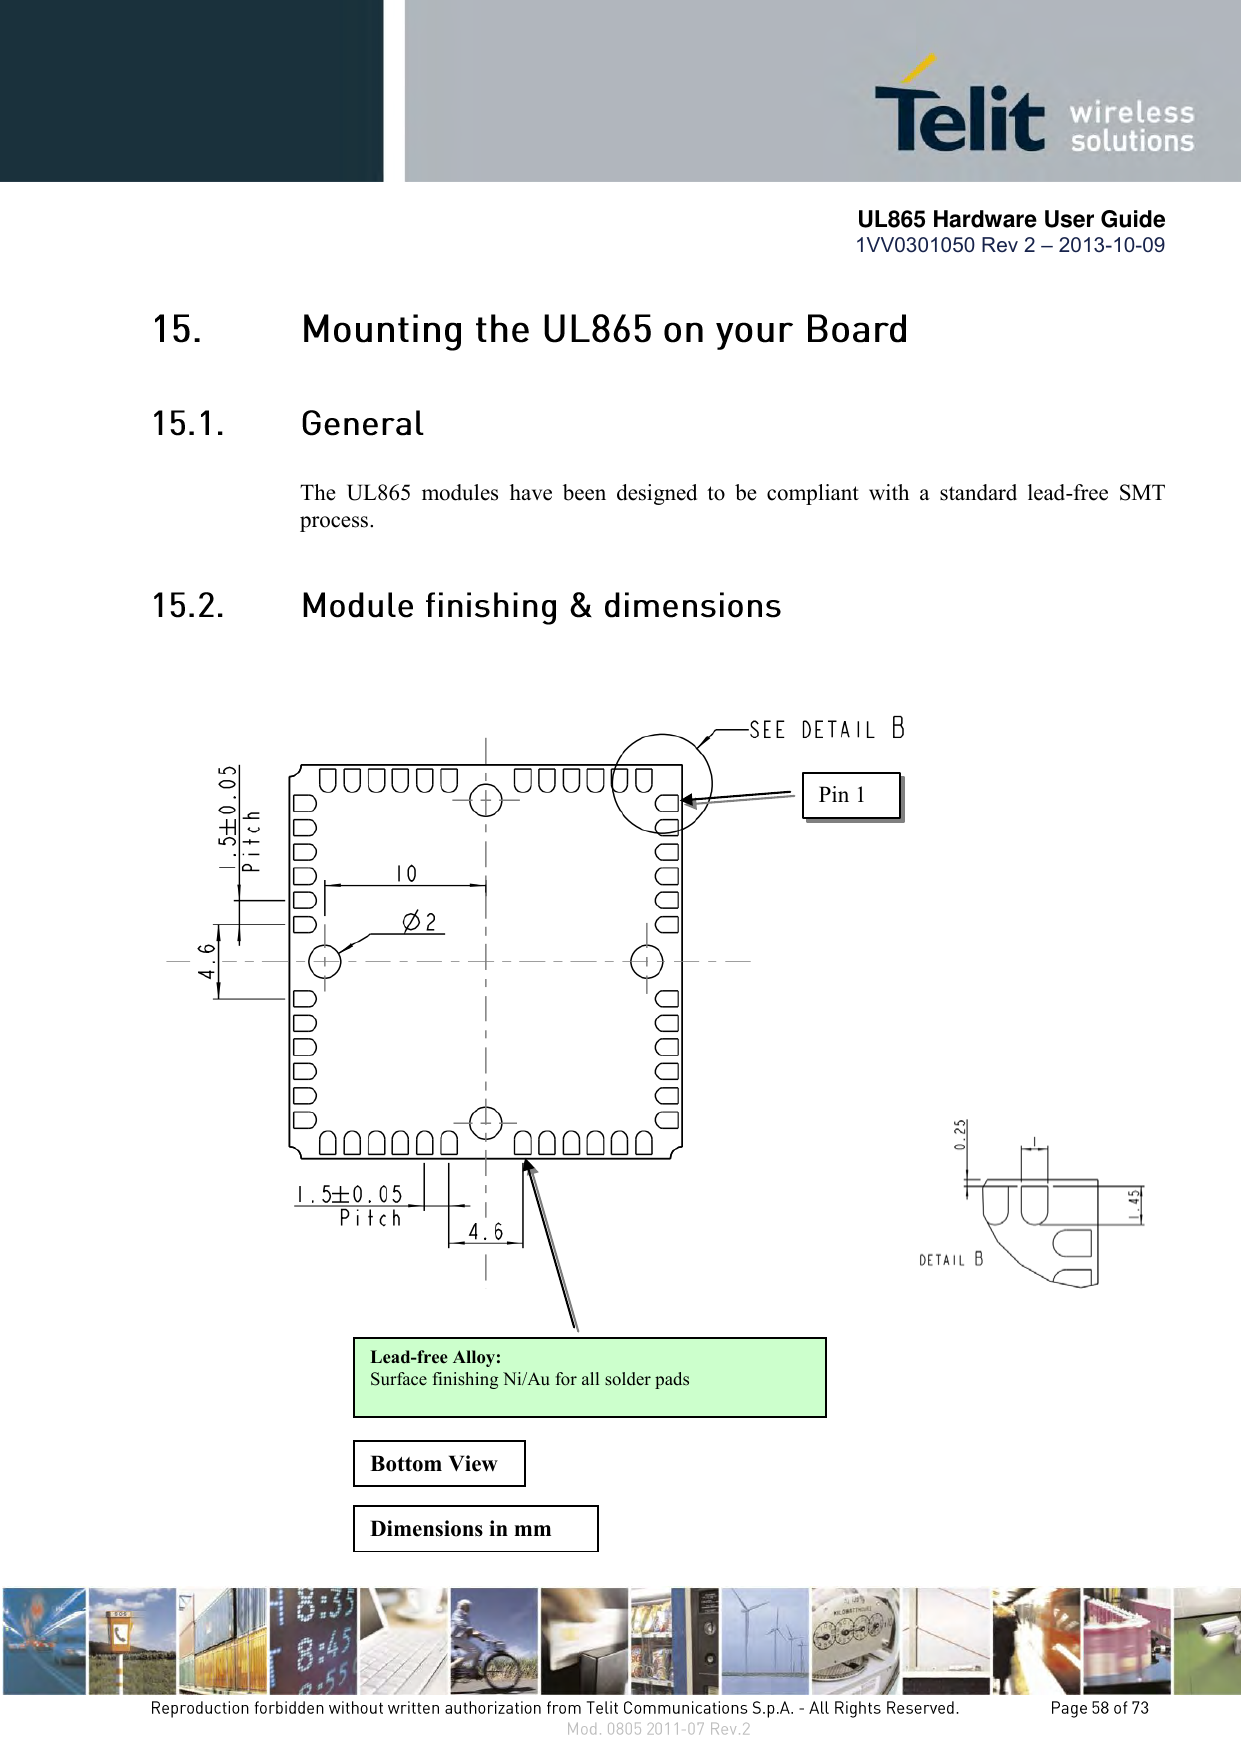       UL865 Hardware User Guide 1VV0301050 Rev 2 – 2013-10-09     The UL865  modules have  been  designed  to  be  compliant  with  a  standard  lead-free  SMT process.   Pin 1 Lead-free Alloy: Surface finishing Ni/Au for all solder pads Bottom View Dimensions in mm 